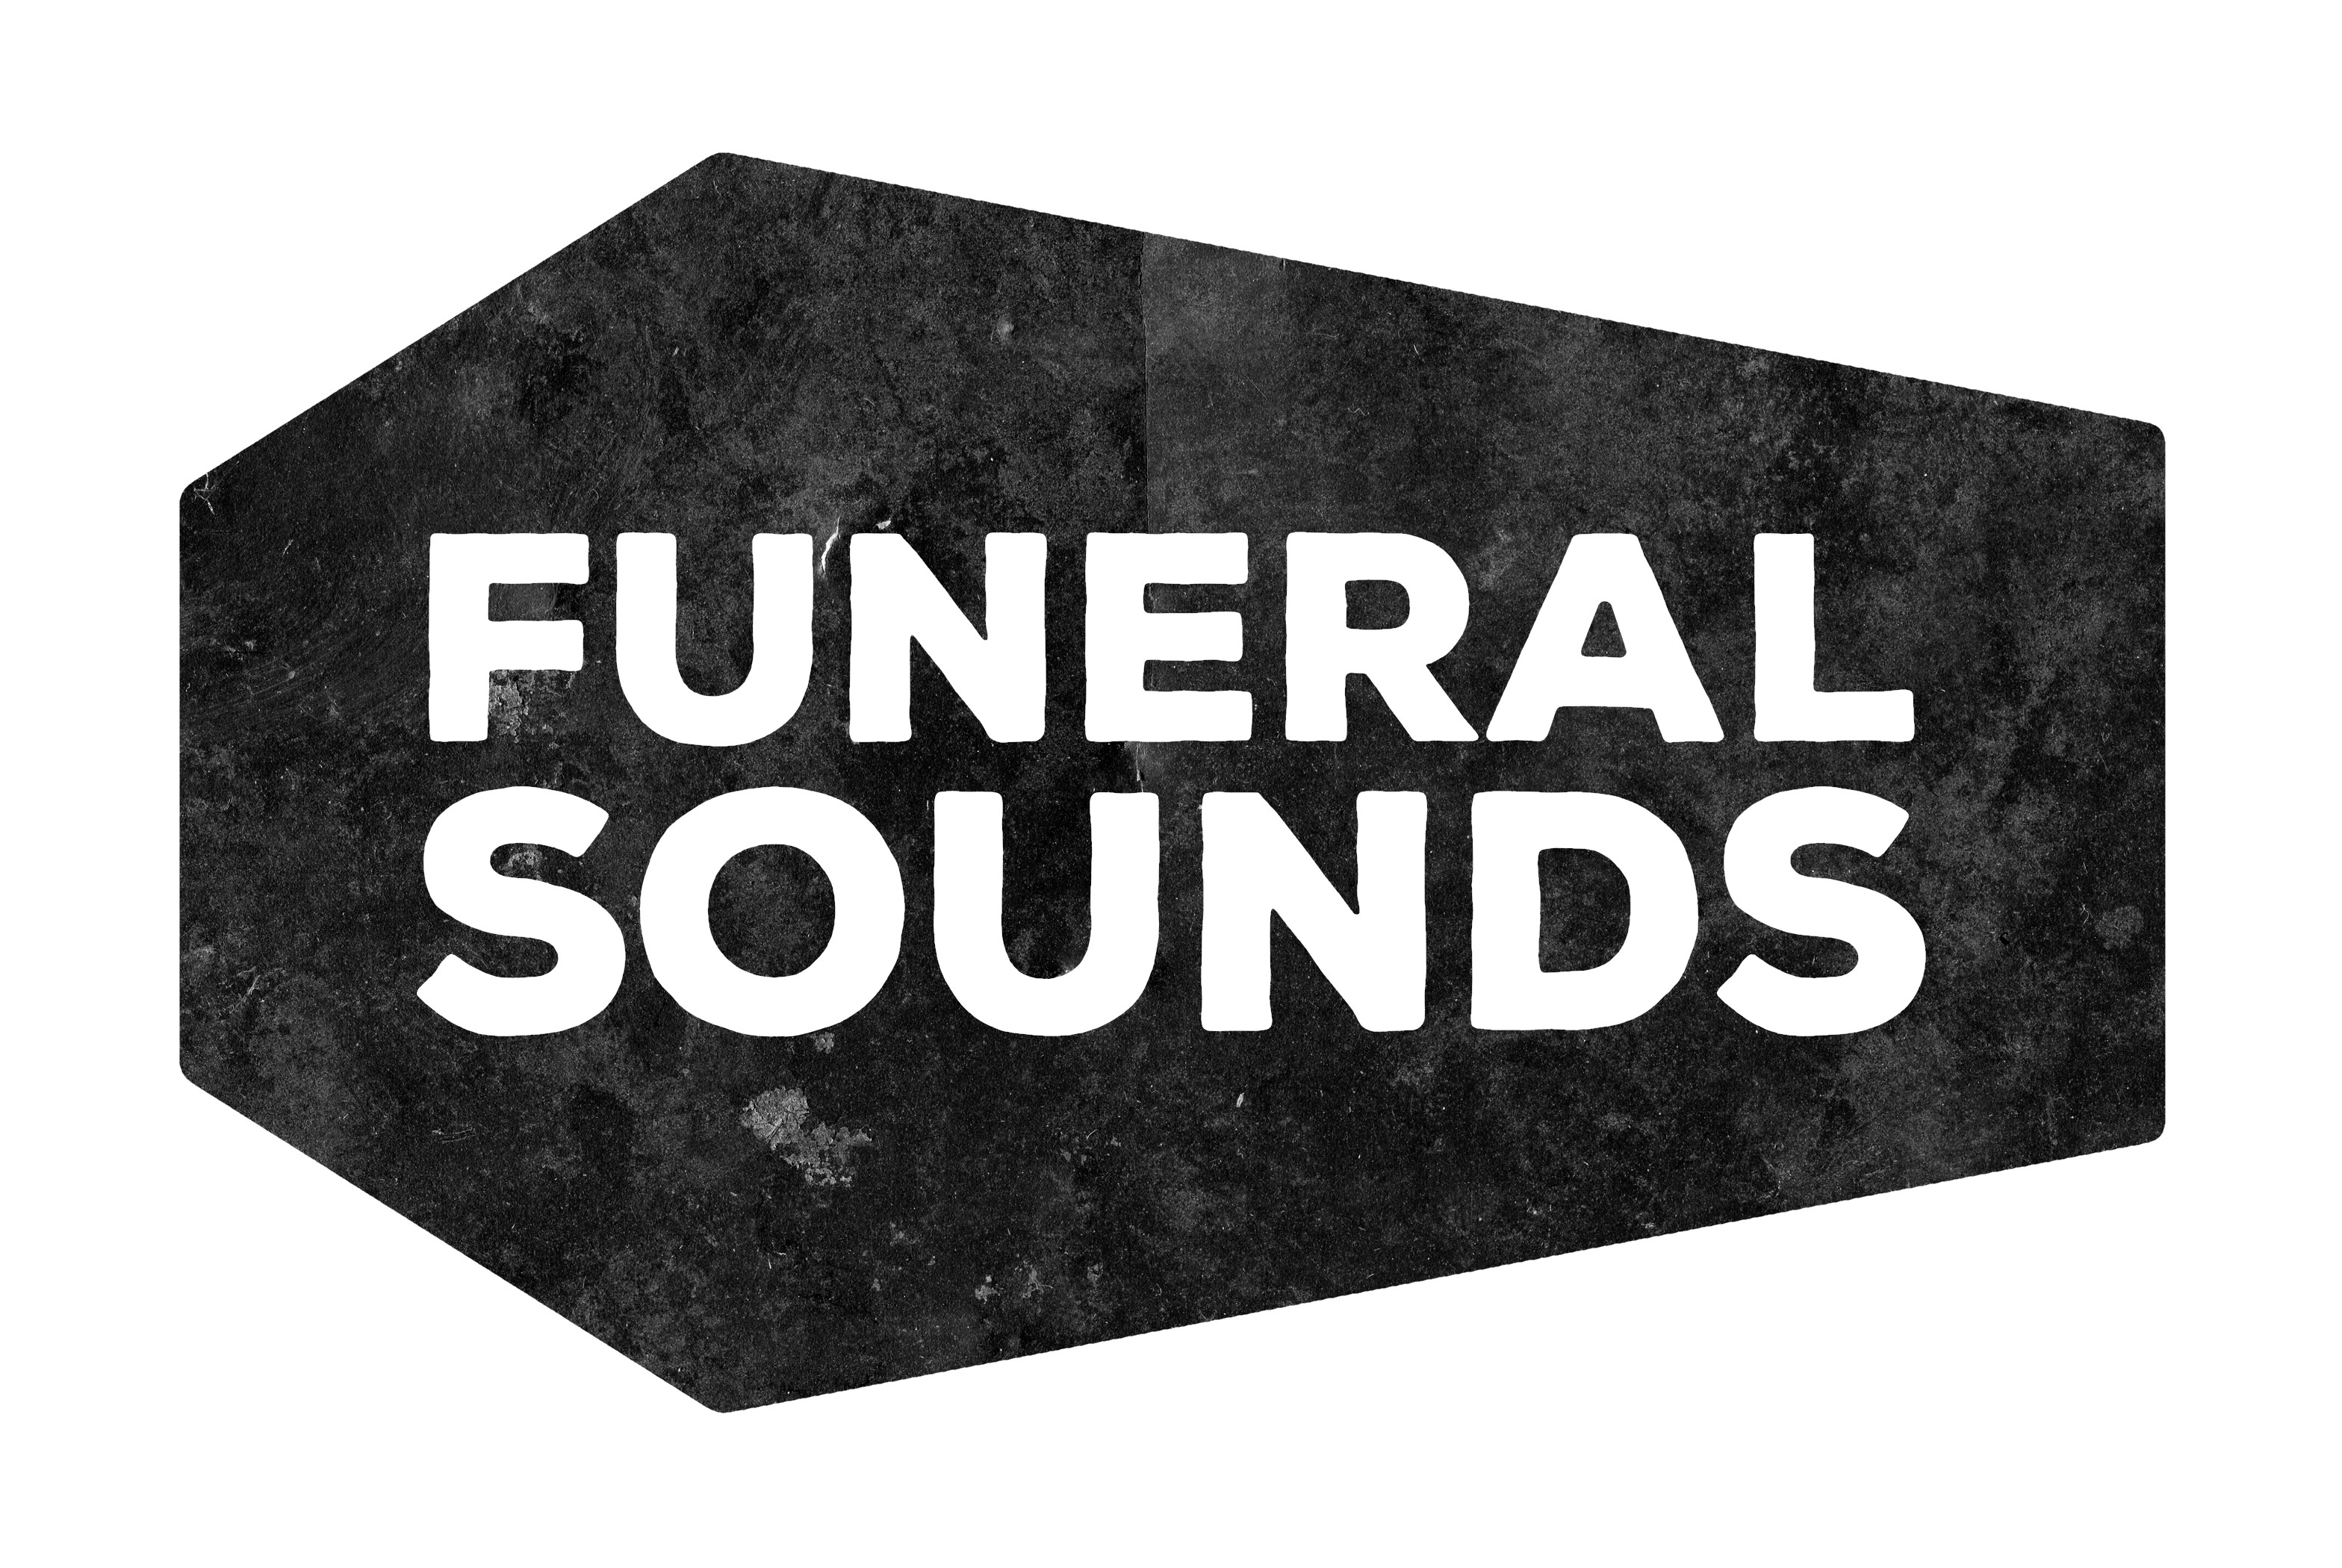 3136x2100 FUNERAL SOUNDS LOGO NO BACKGROUND HOLLOW LETTERS